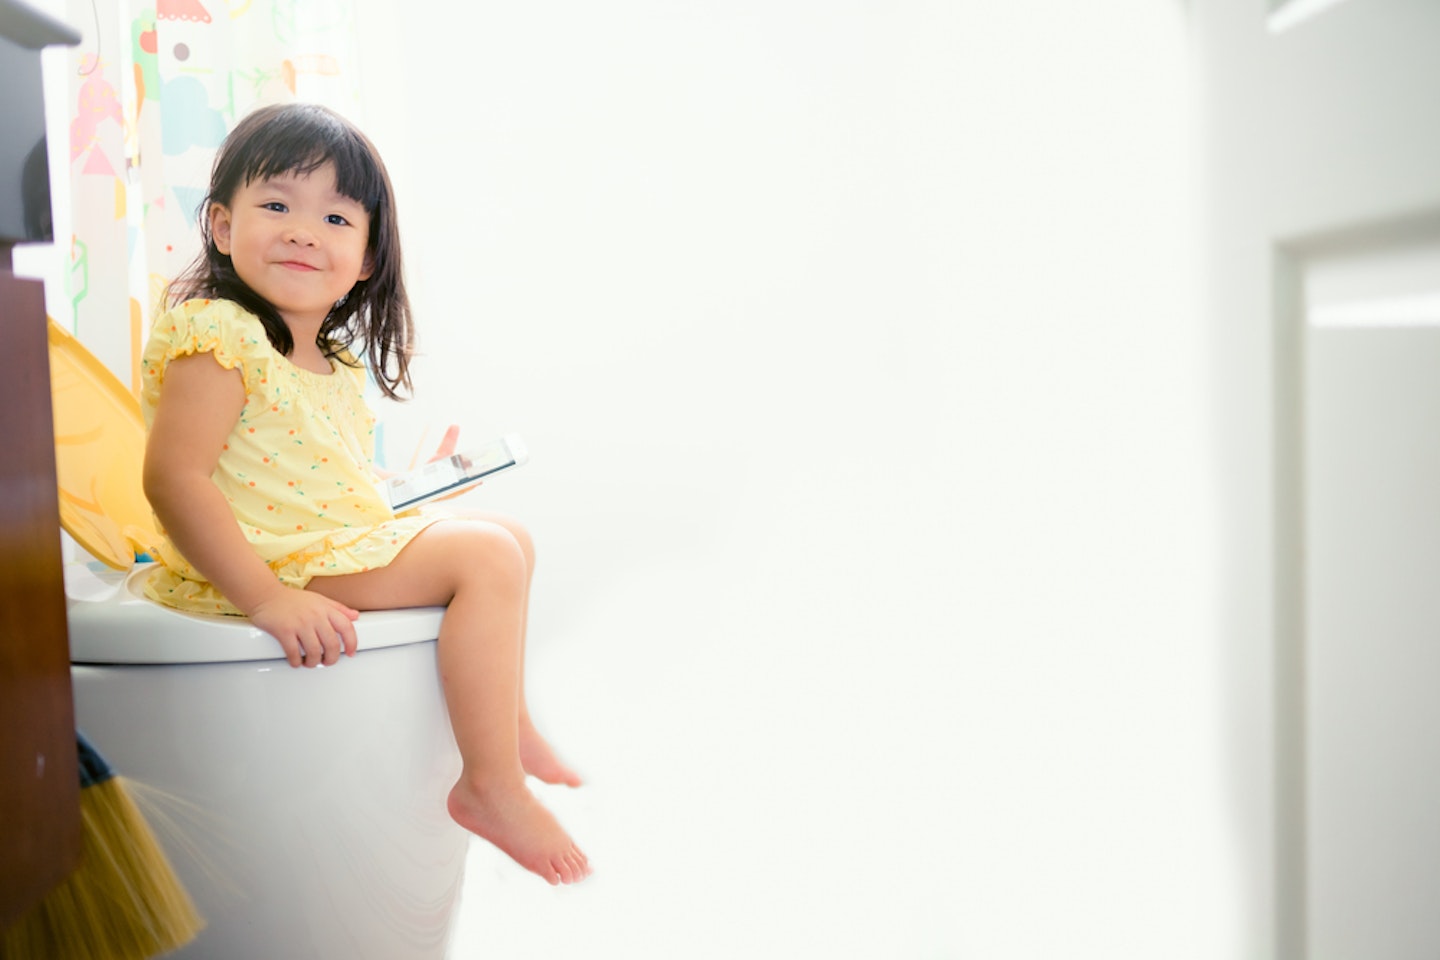 Toddler on the toilet